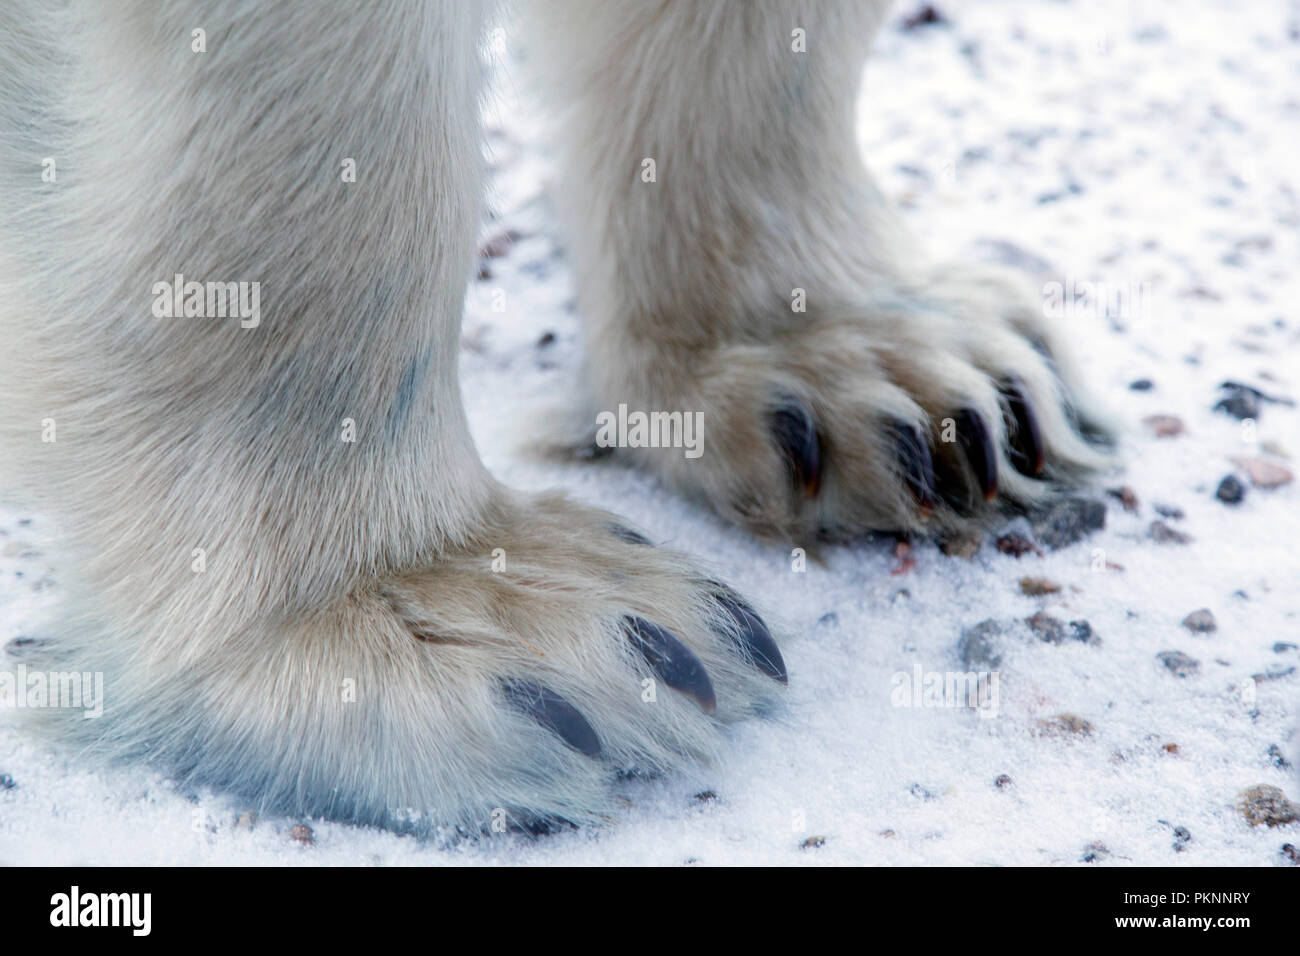 Feet and claws of a polar bear (Ursus maritimus) on snowy ground by the Hudson Bay in Manitoba, Canada. Bears wait by the shoreline ahead of the ice f Stock Photo